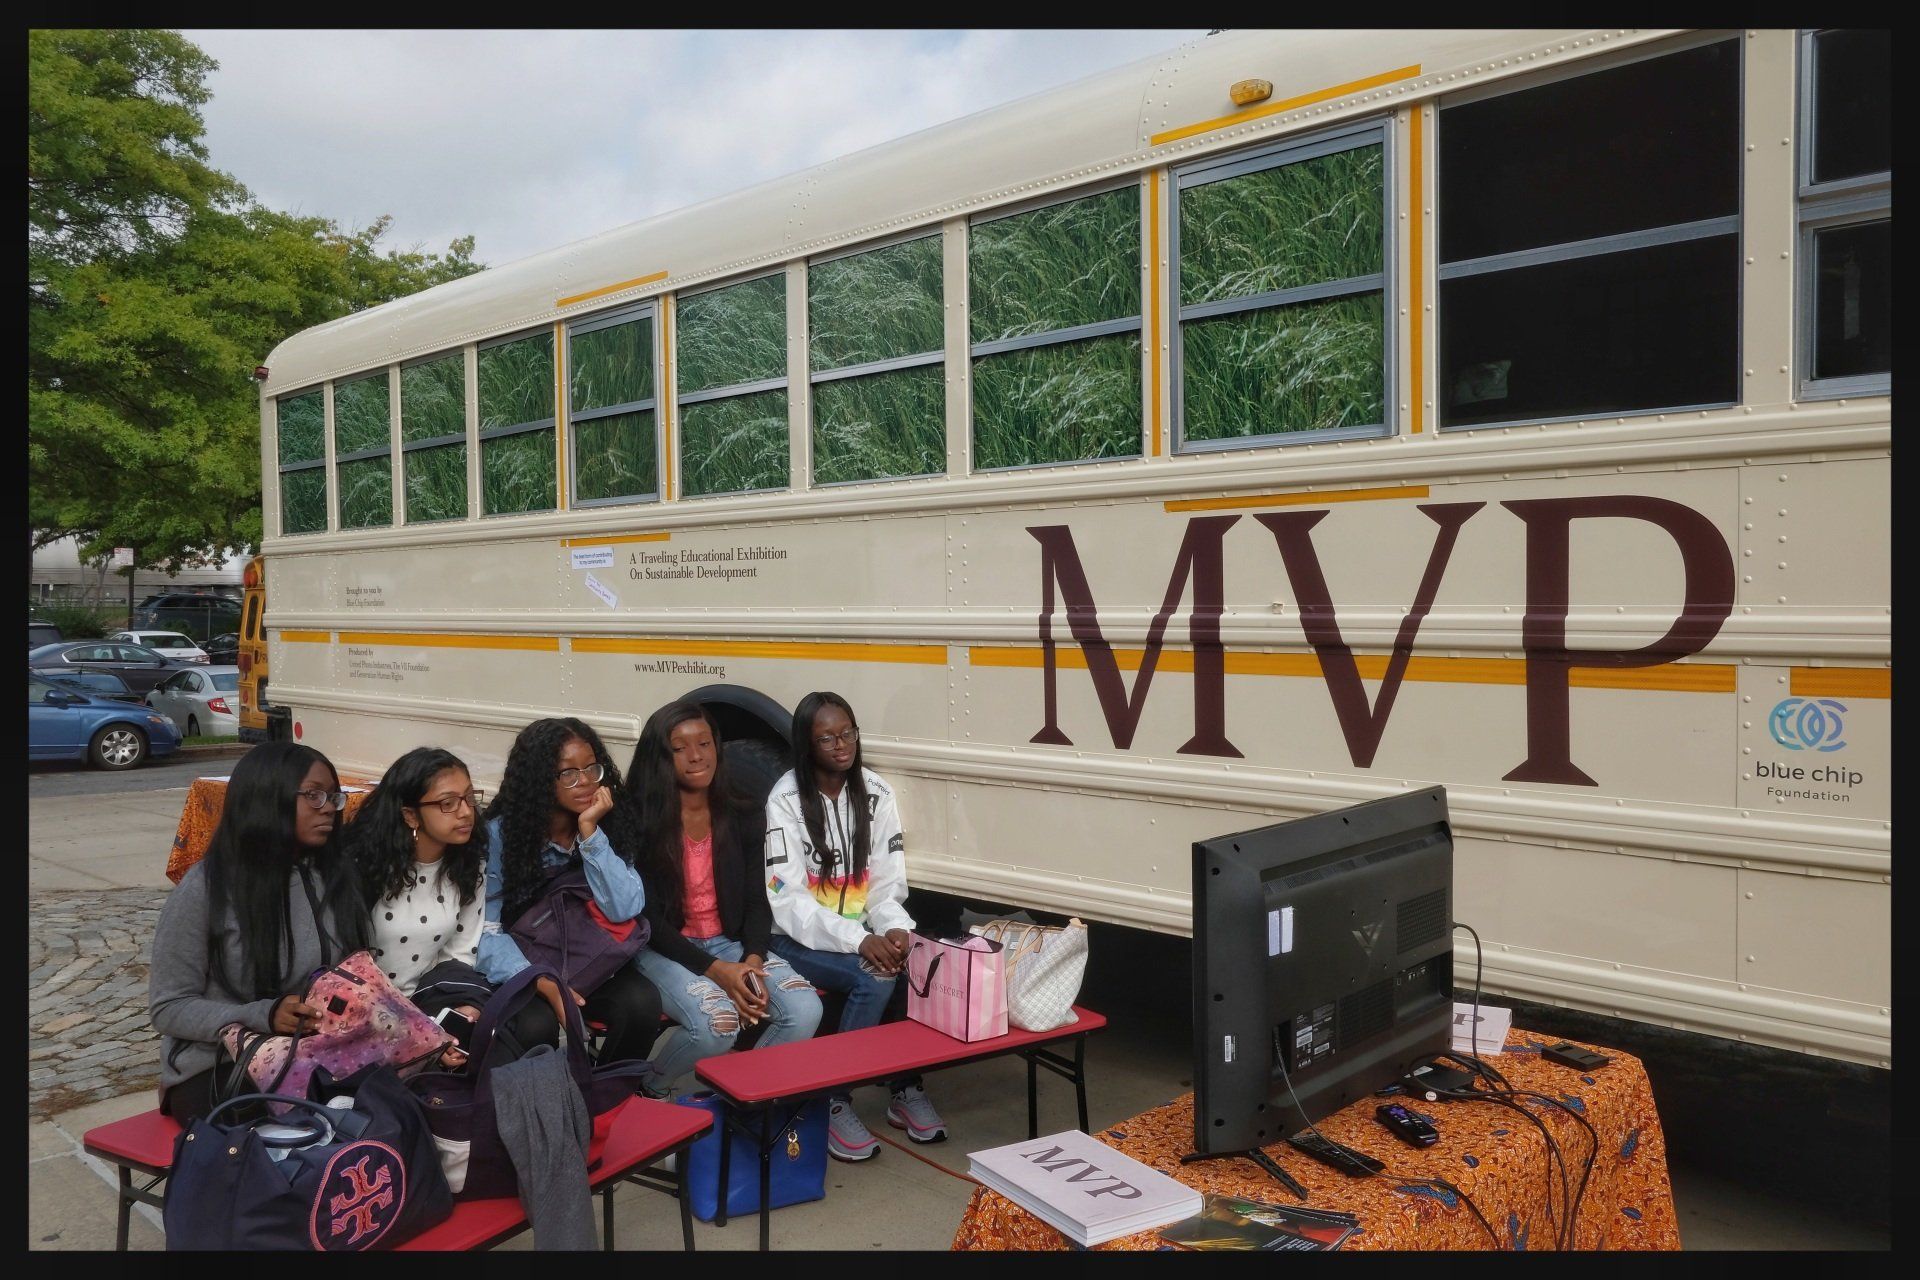 A traveling education exhibit powered by the lessons learned from the Millennium Villages Project (MVP).